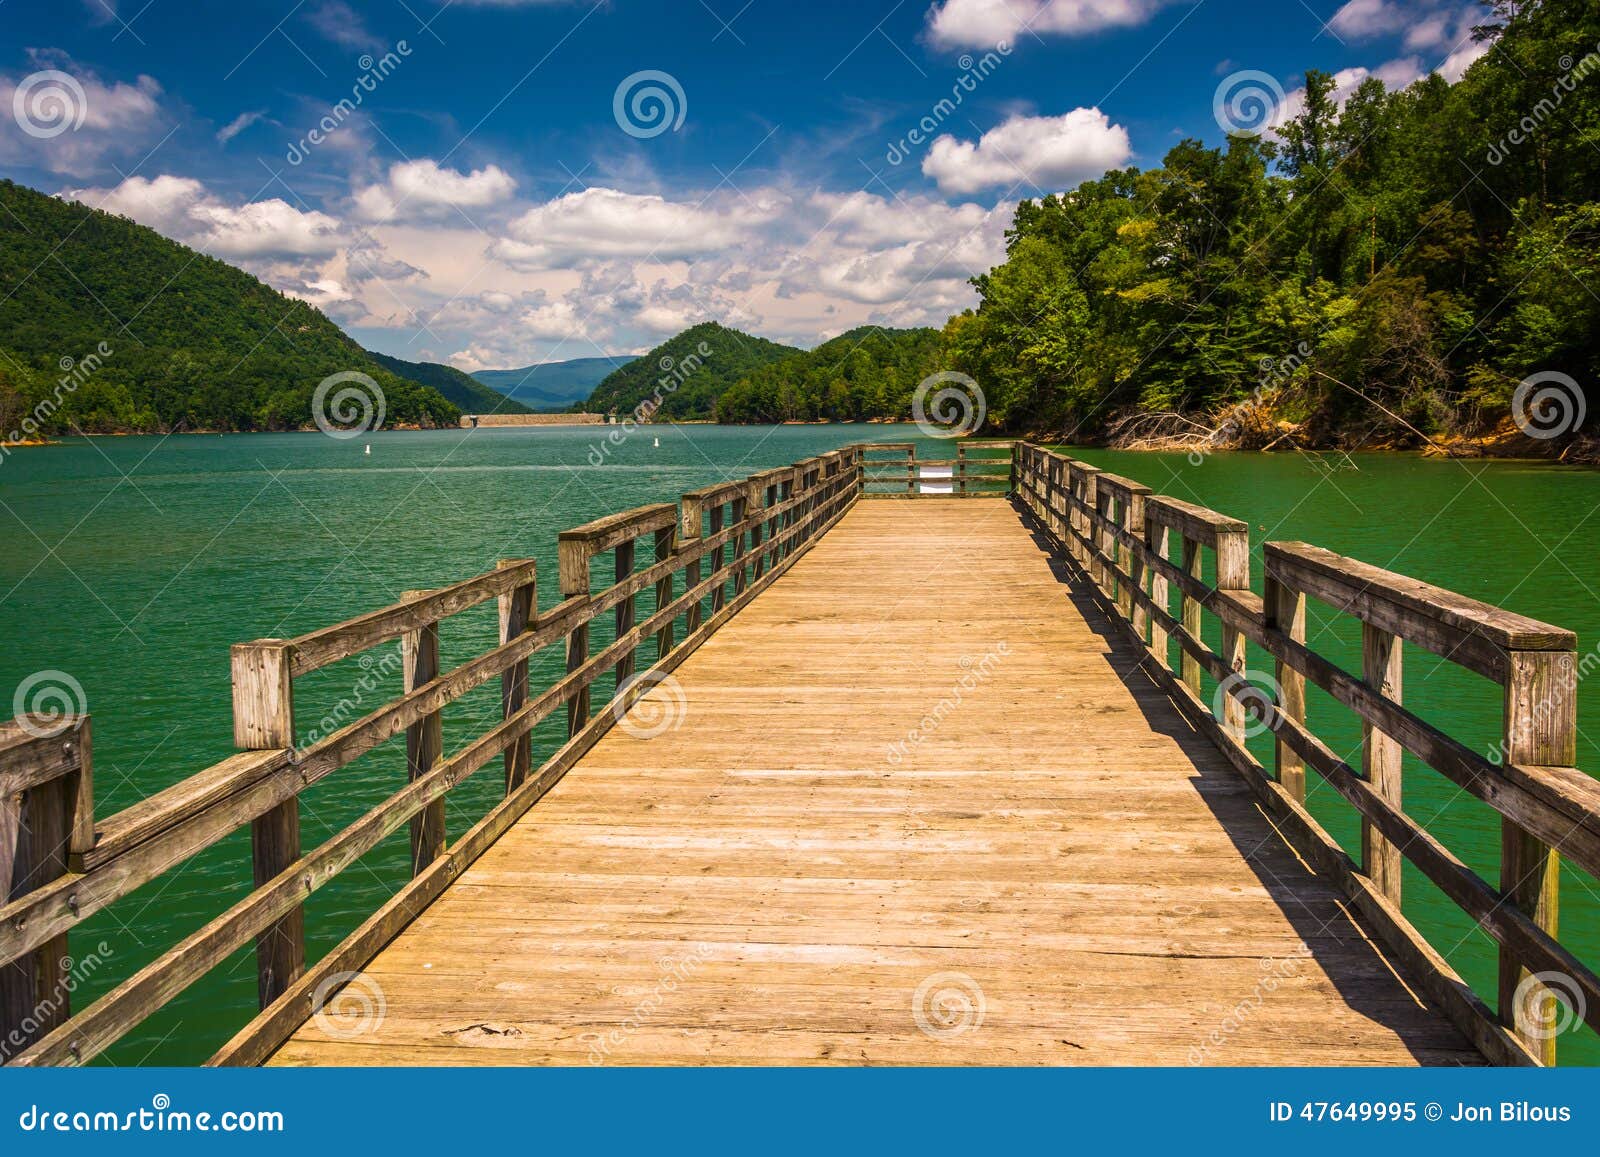 fishing pier at watauga lake, in cherokee national forest, tennessee.